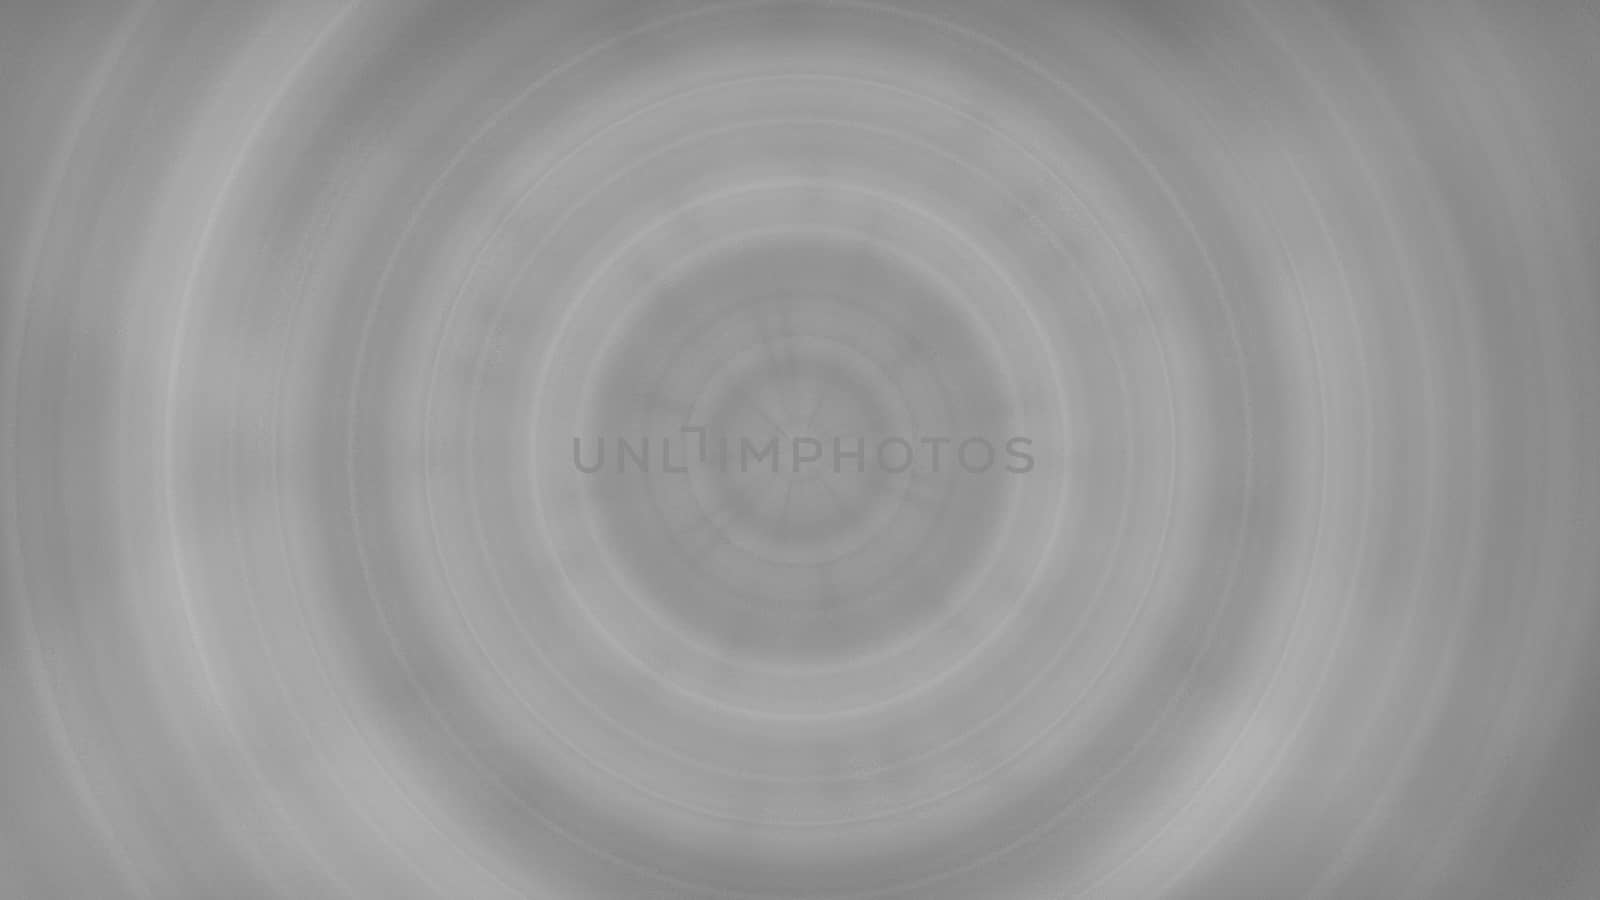 Abstract background of colorful spin radial motion blur. 3d rendering